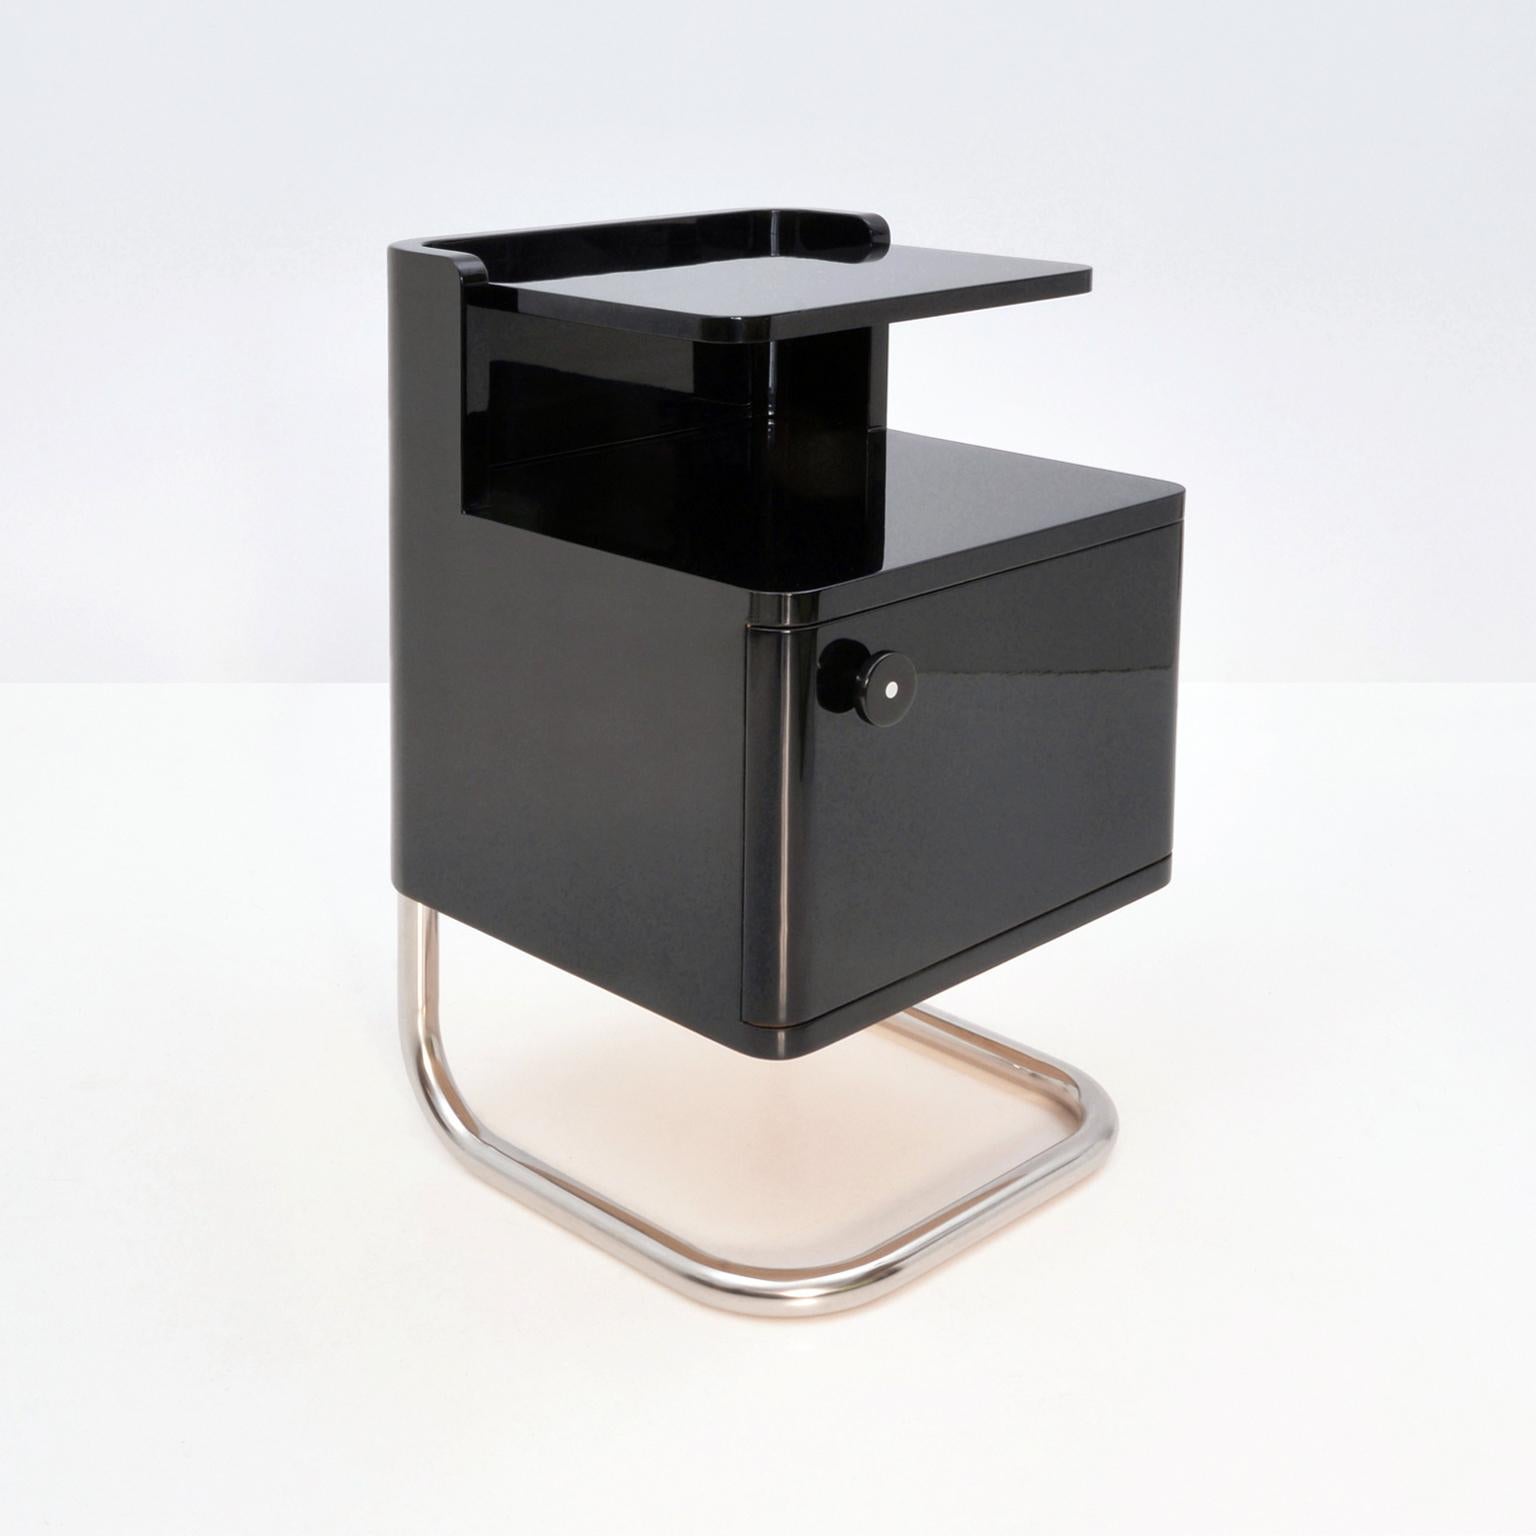 Modern contemporary customizable night stand, handcrafted wood, manufactured by GMD Berlin, Germany, 2019.

Delivery time: 6-7 weeks.